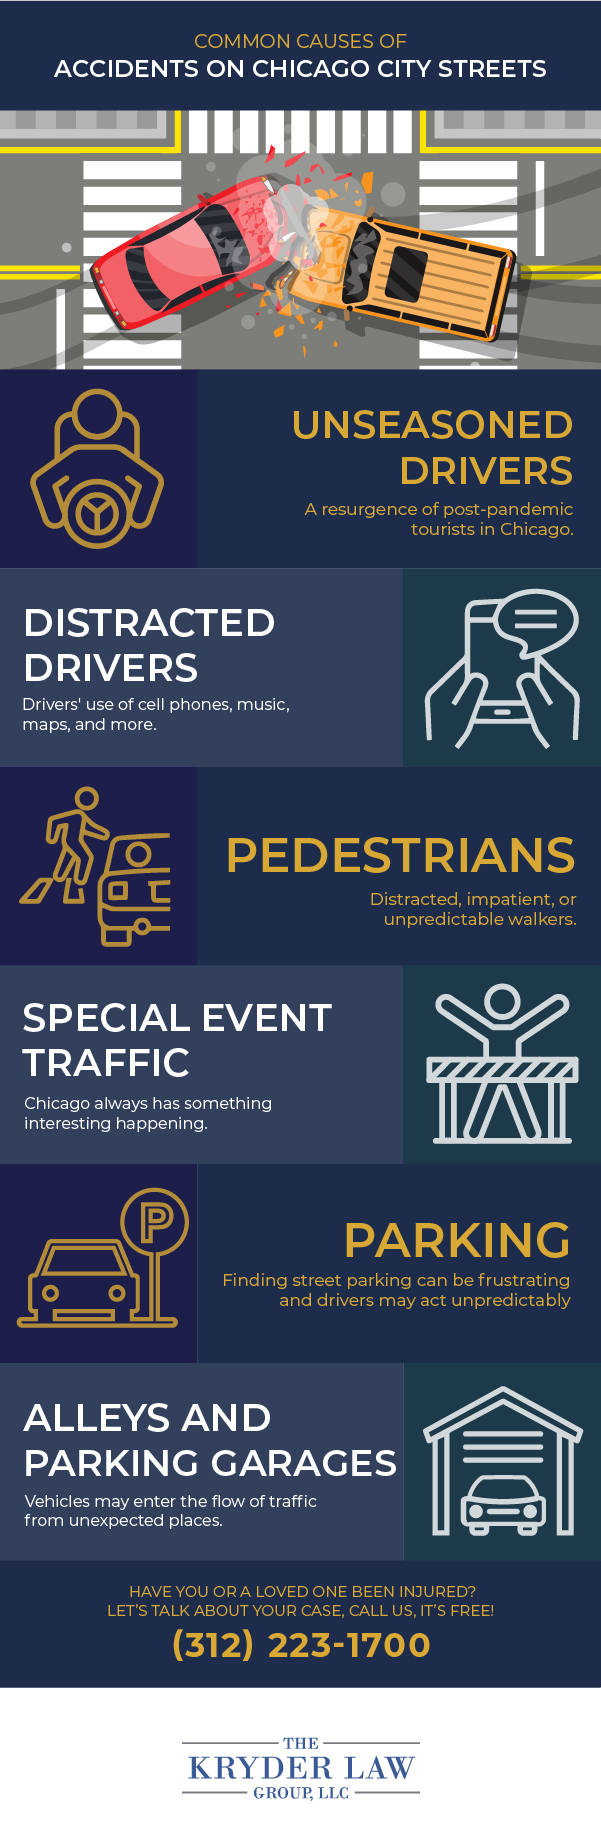 Common Causes of Accidents on Chicago City Streets